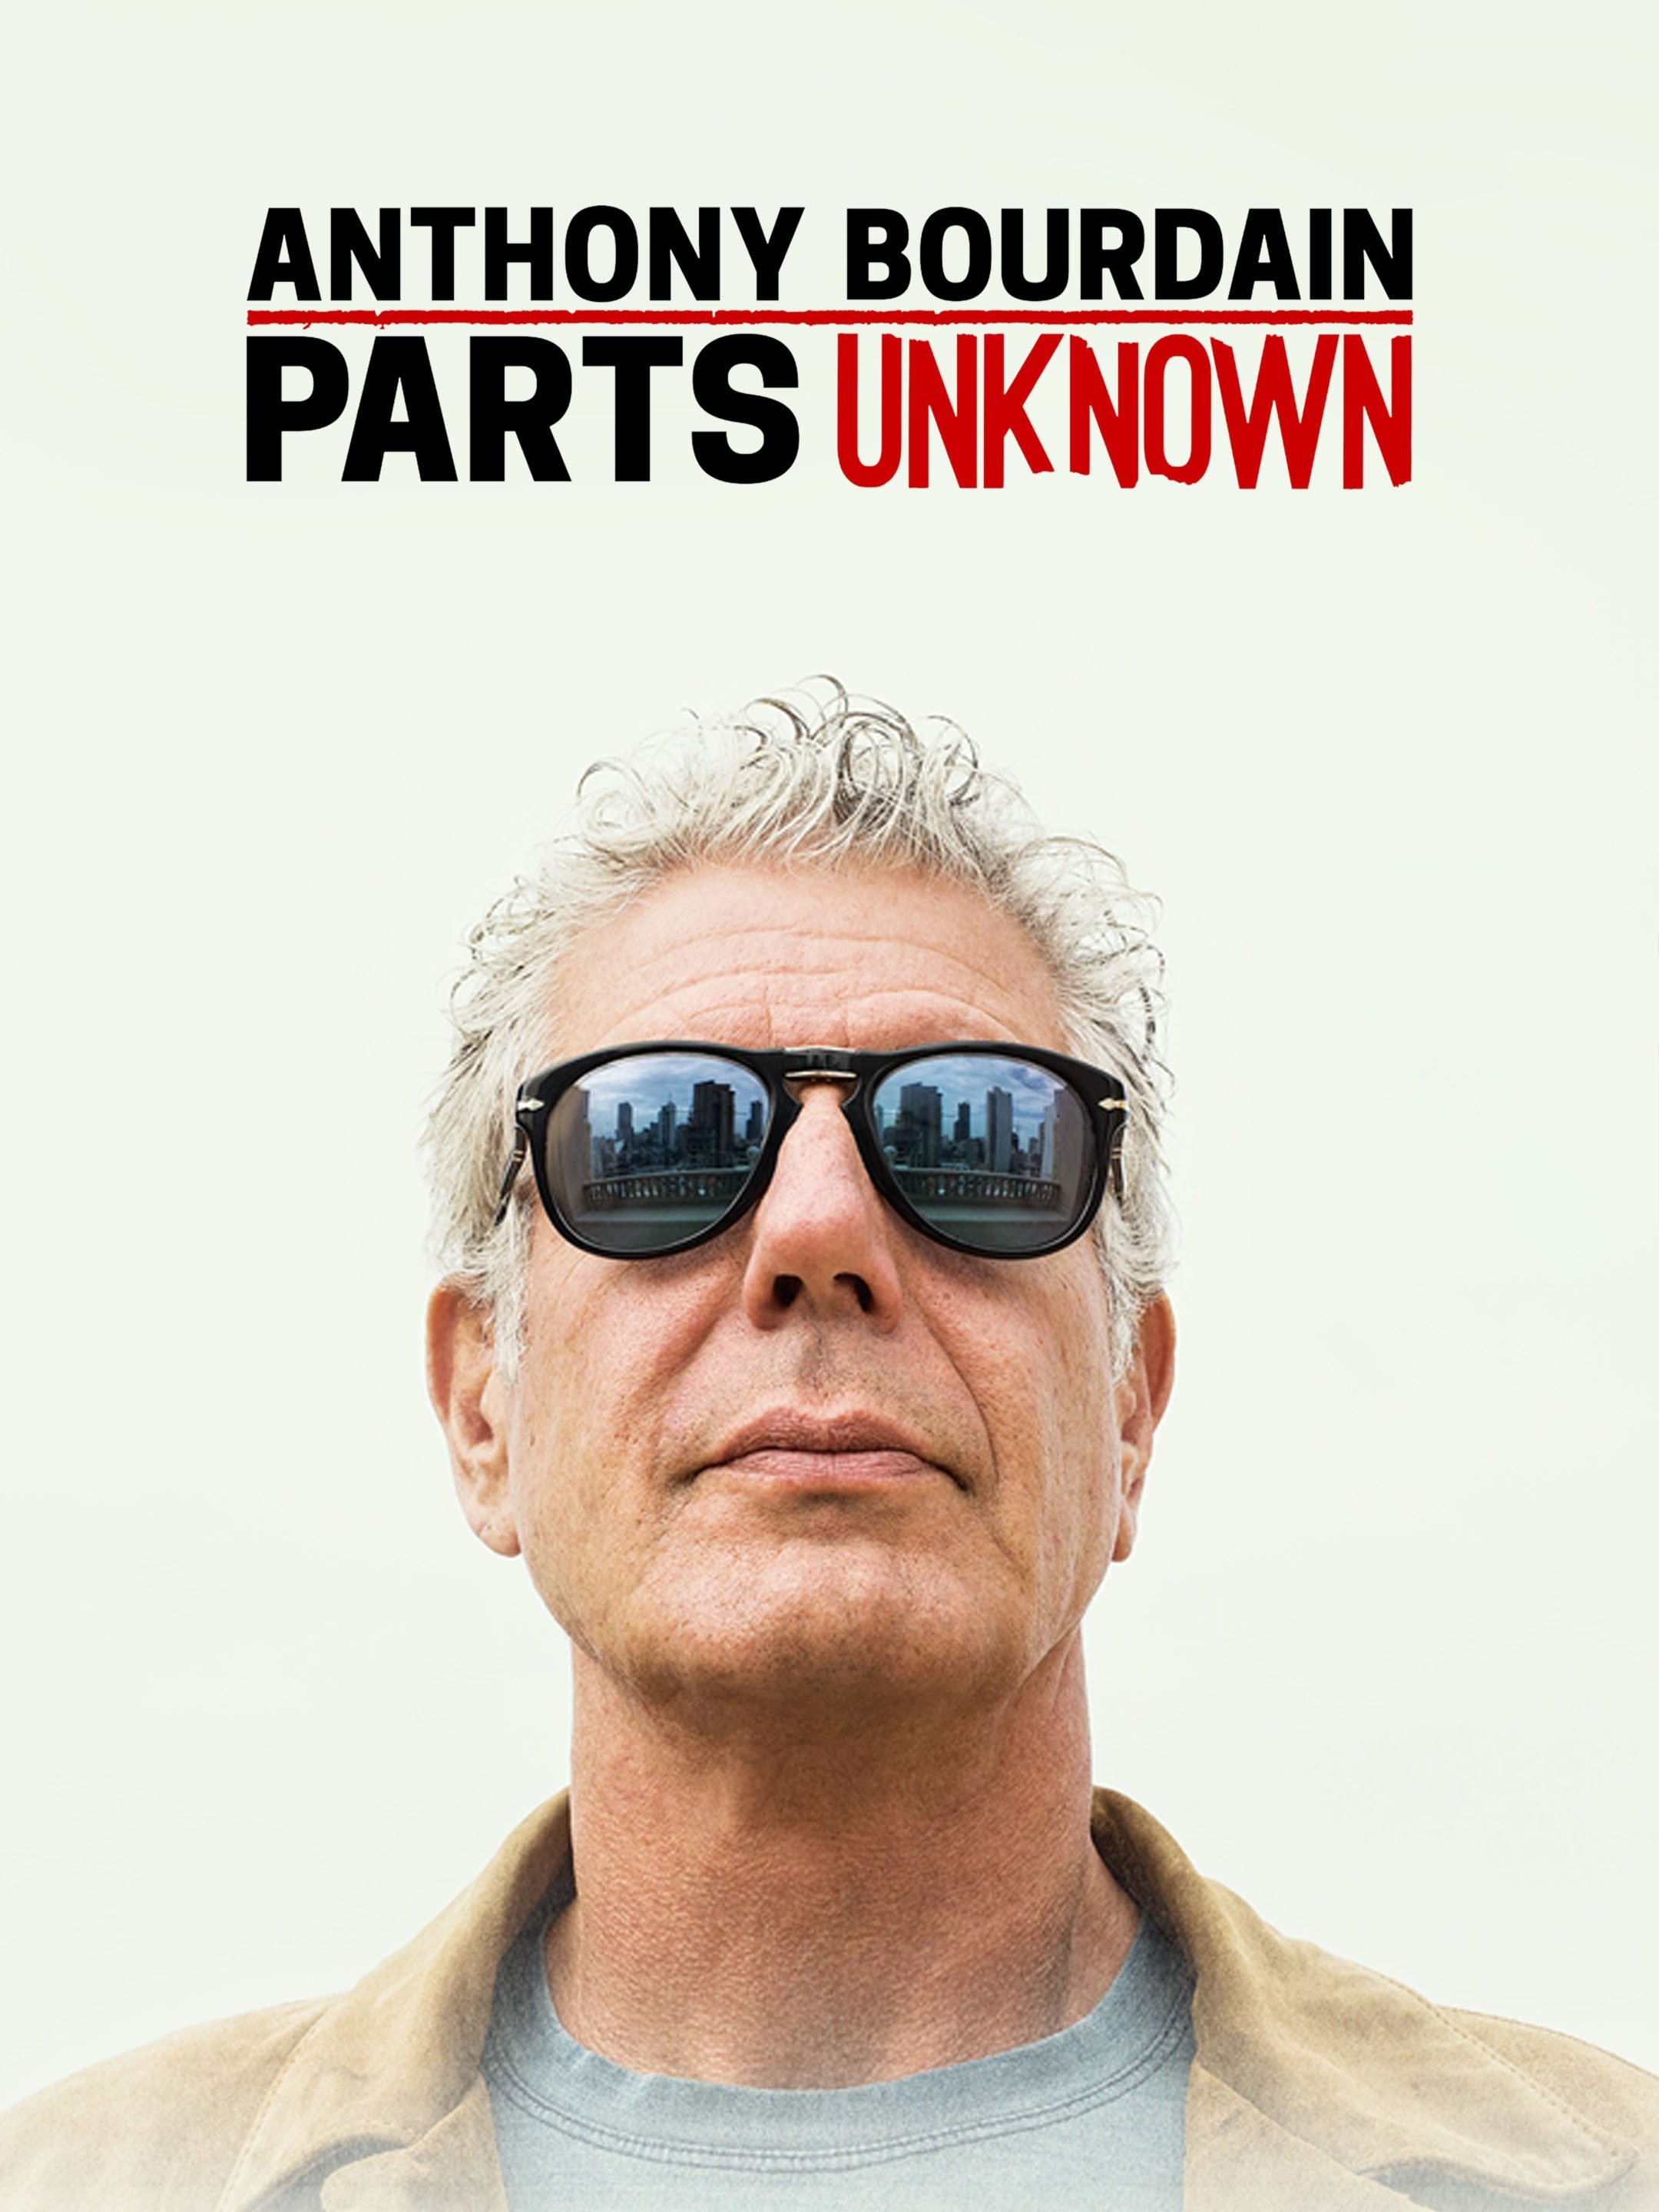 Bourdain Anthony, The journey changes you